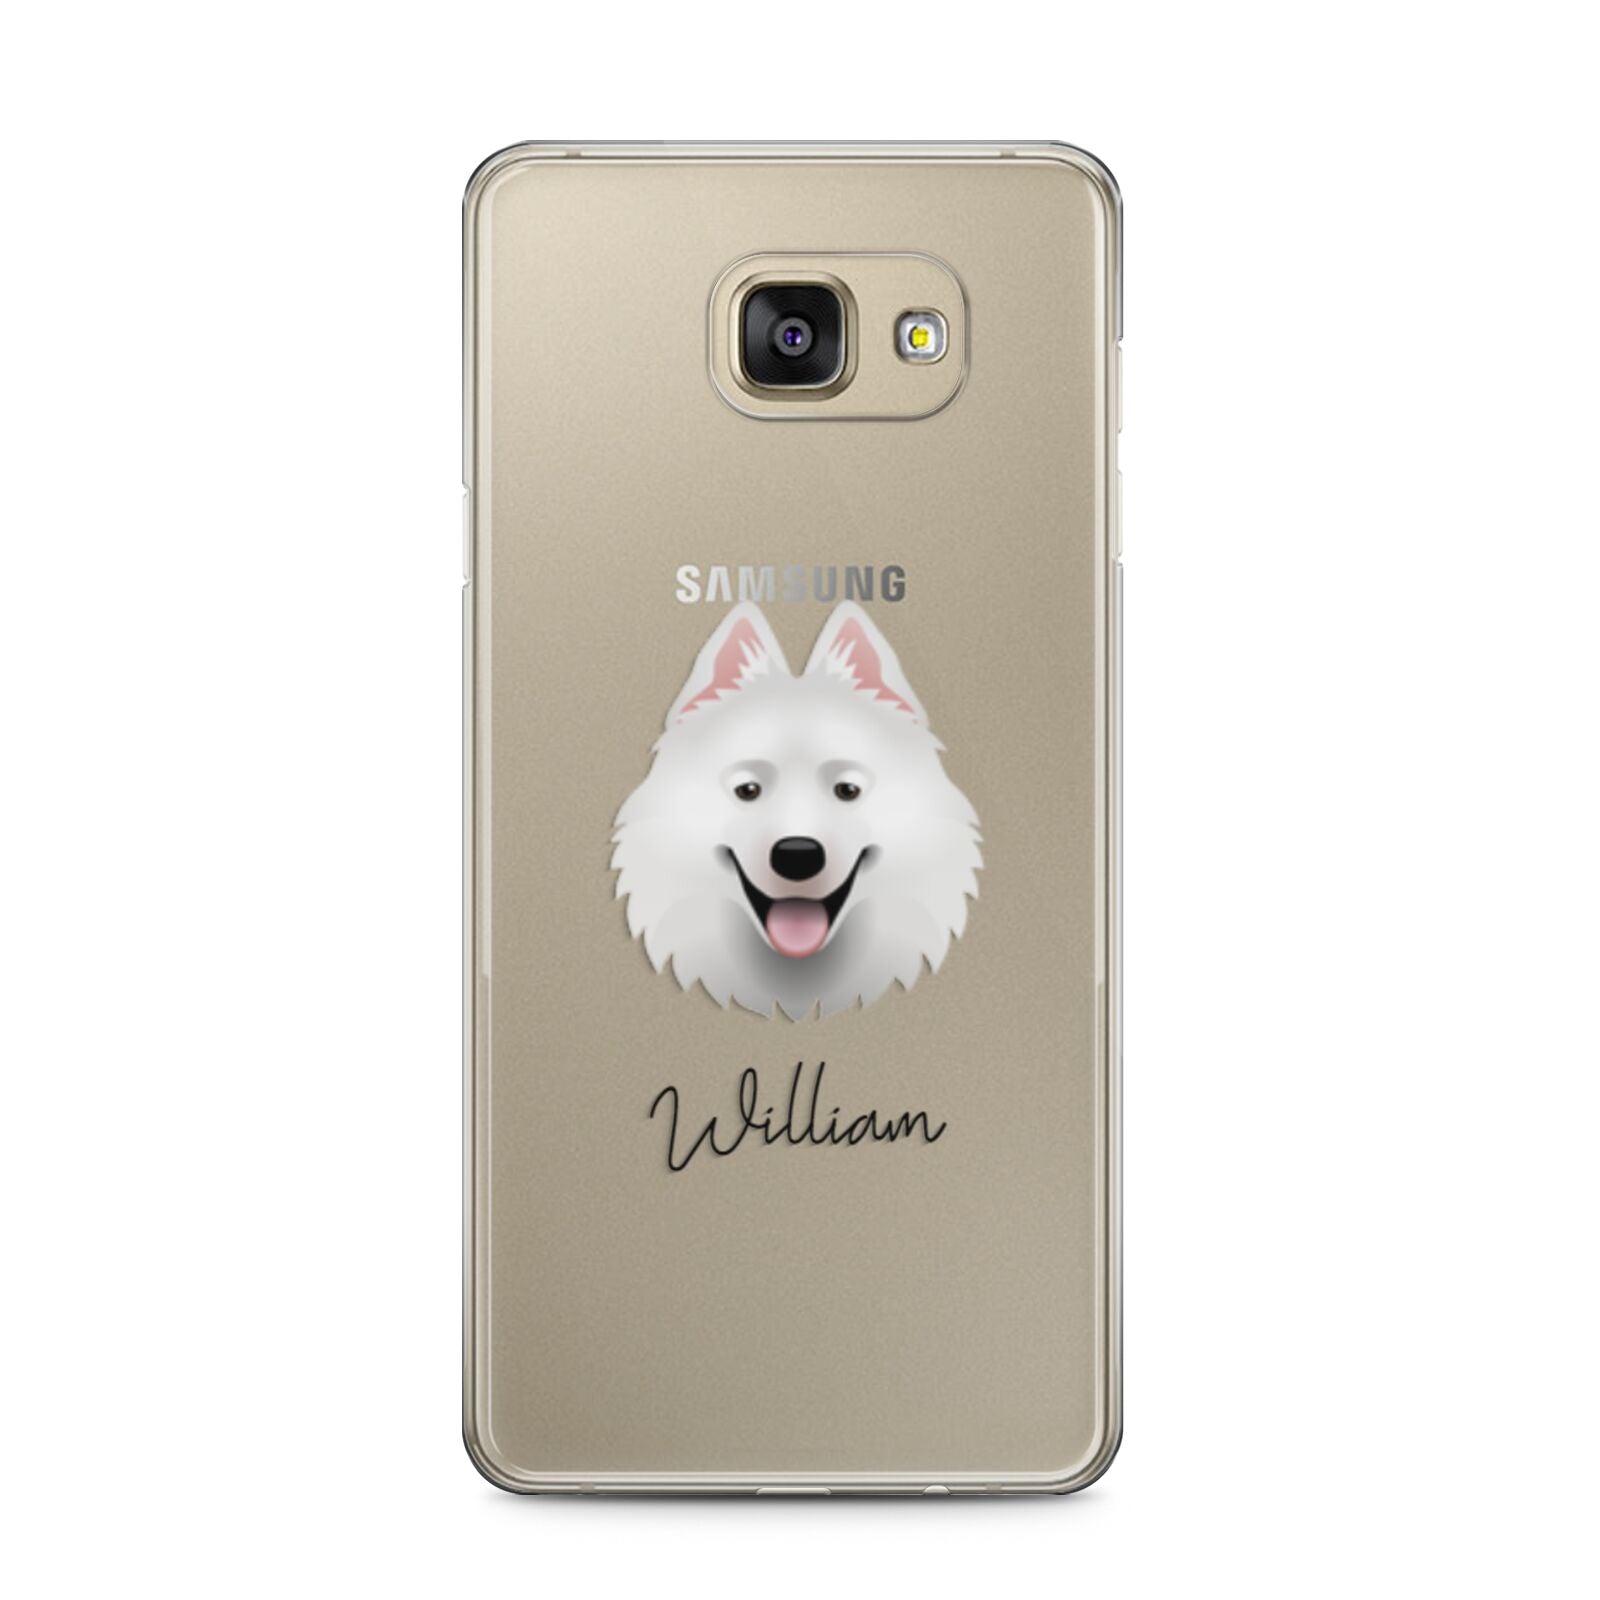 Samoyed Personalised Samsung Galaxy A5 2016 Case on gold phone